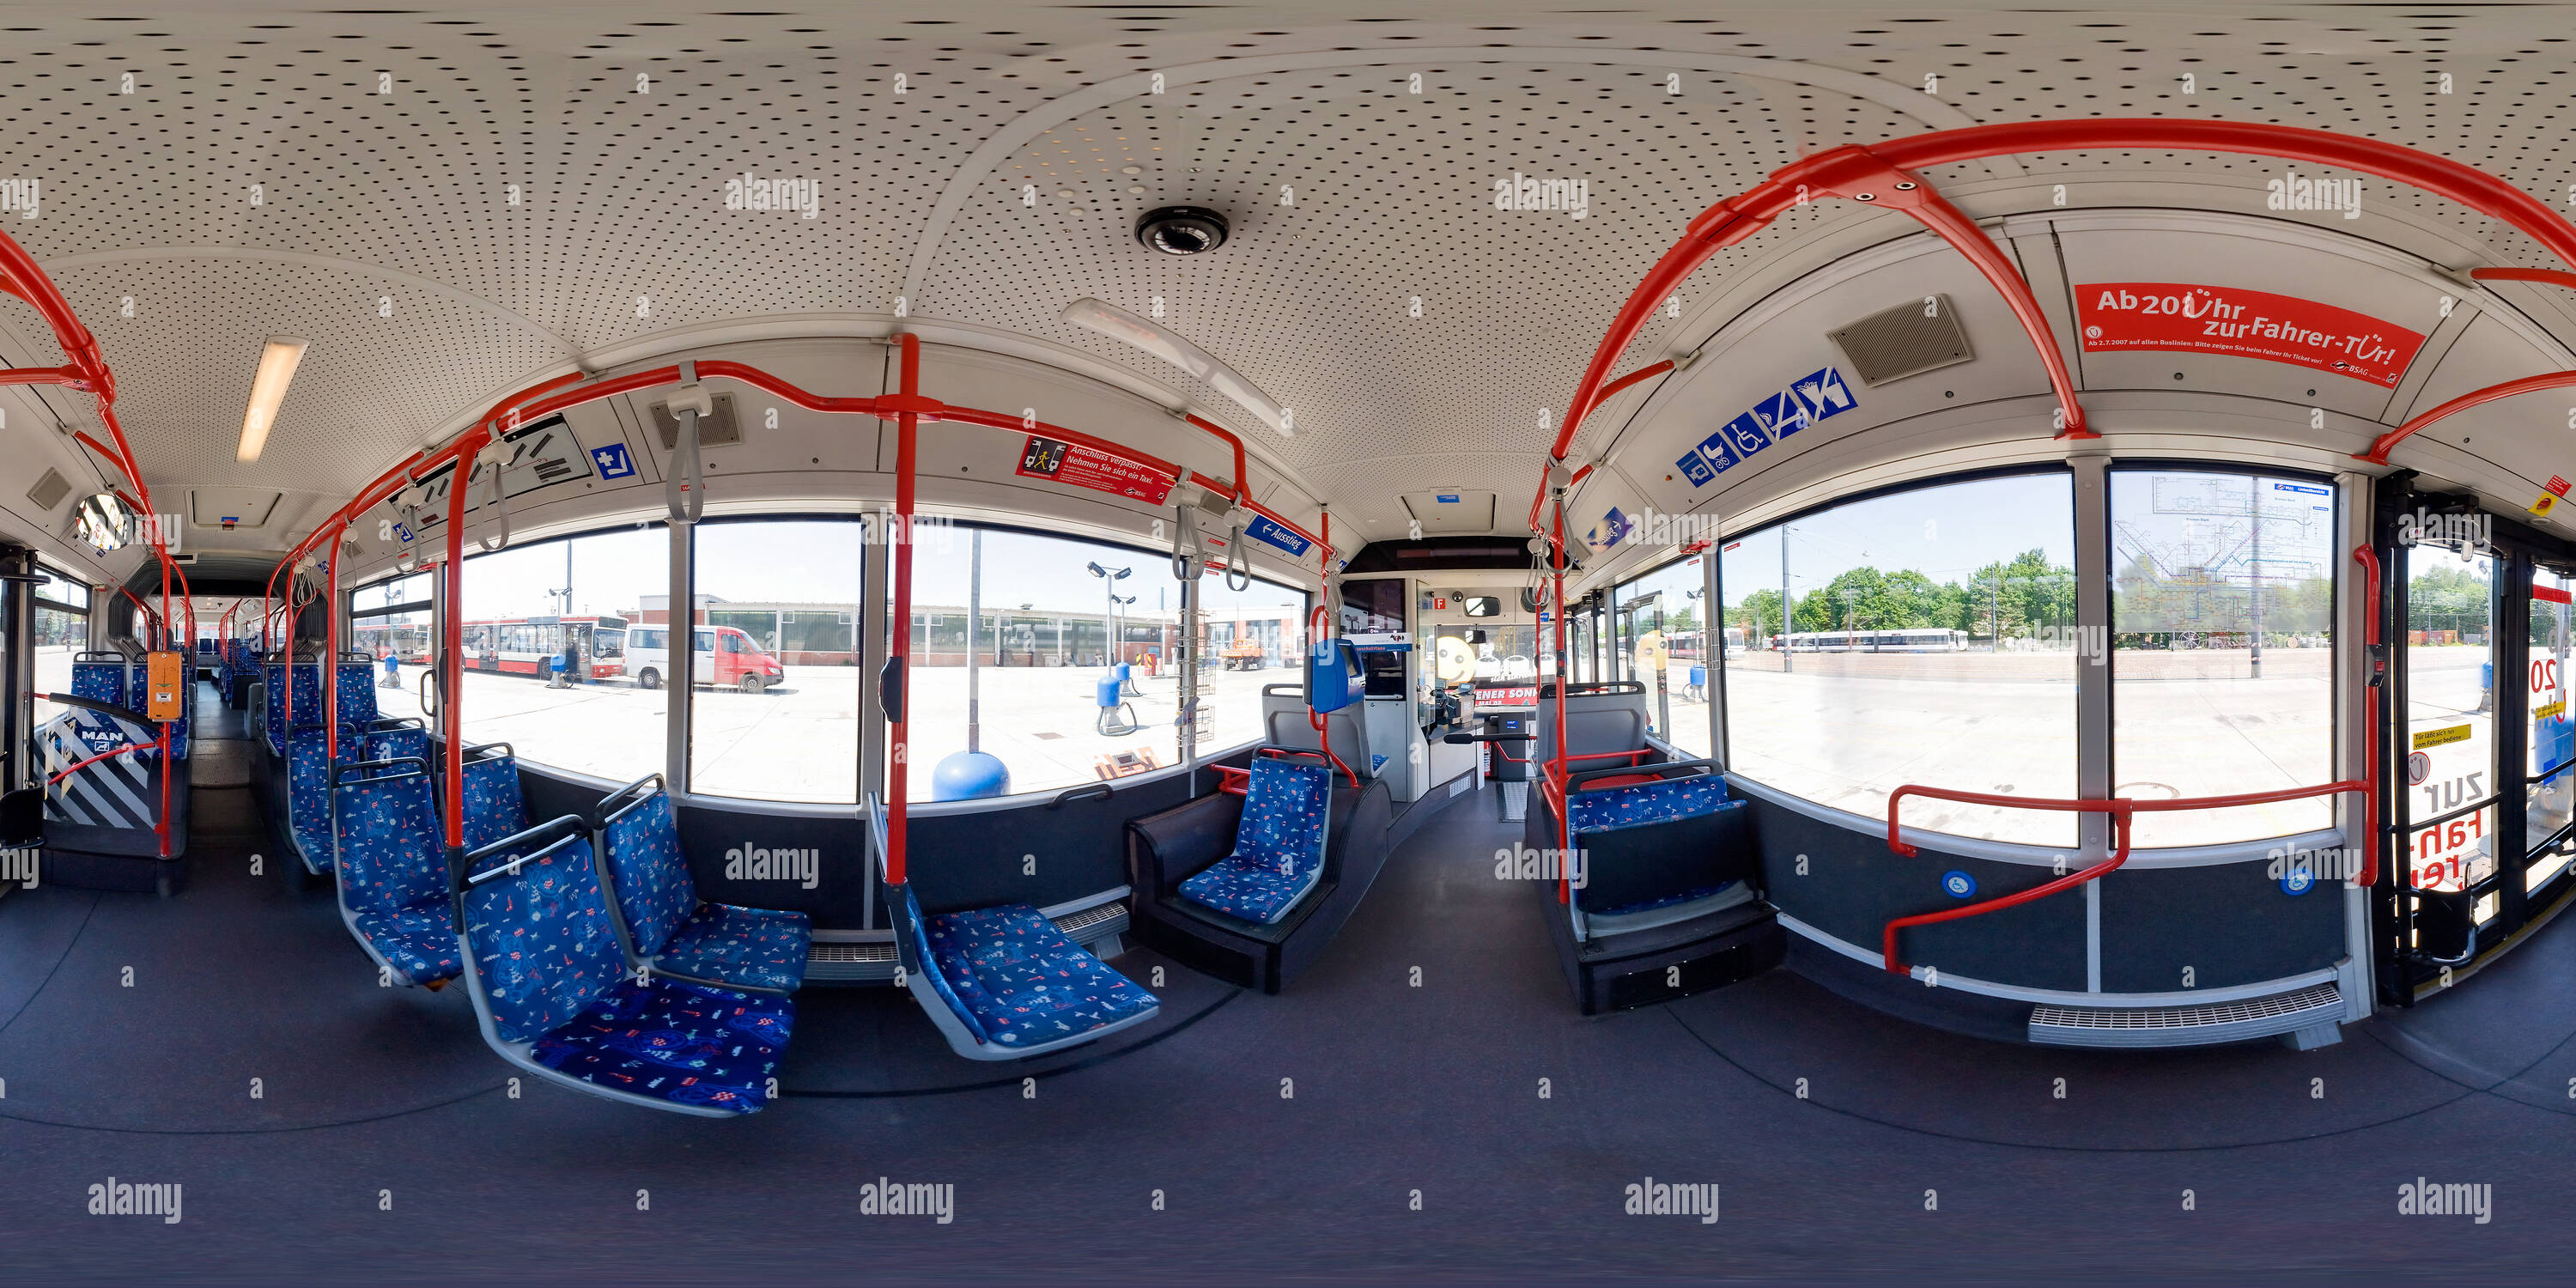 360 degree panoramic view of BSAG MAN Bus